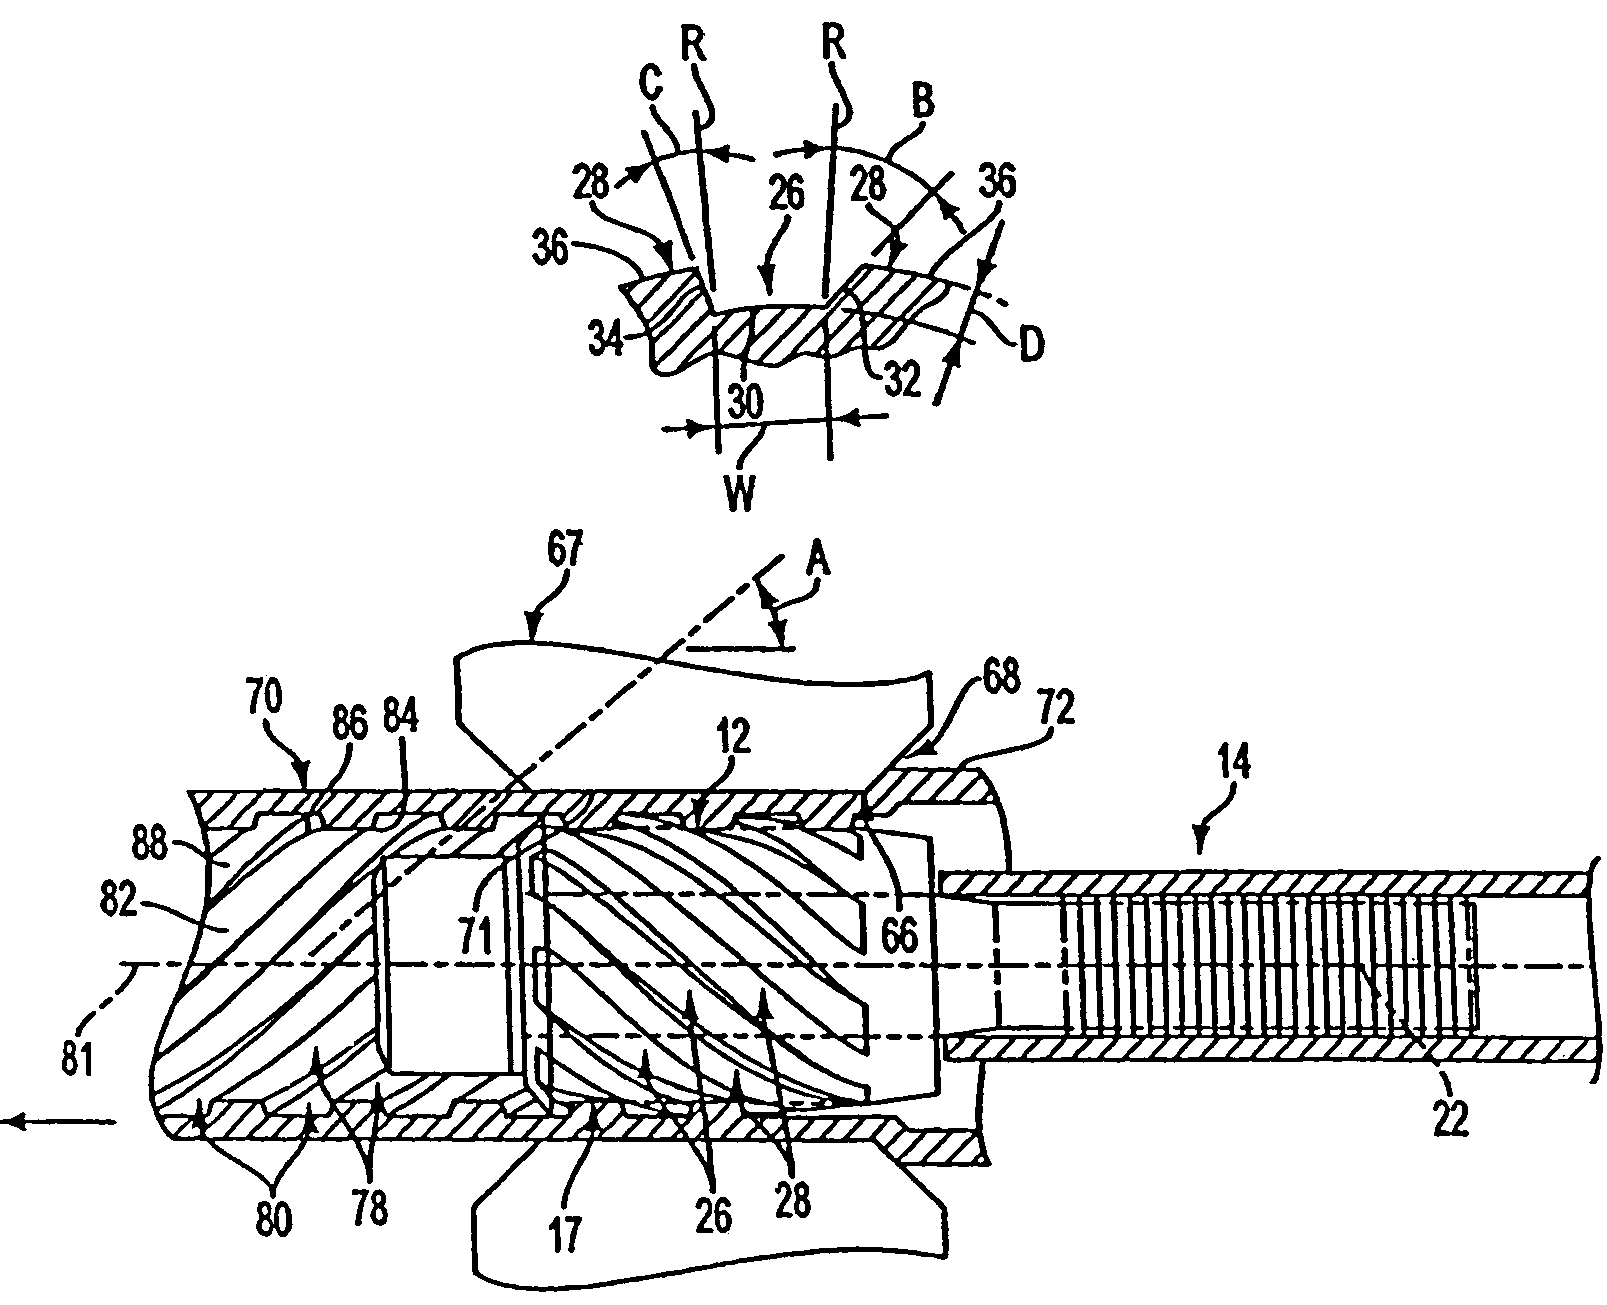 Apparatus and method for forming internally ribbed or rifled tubes